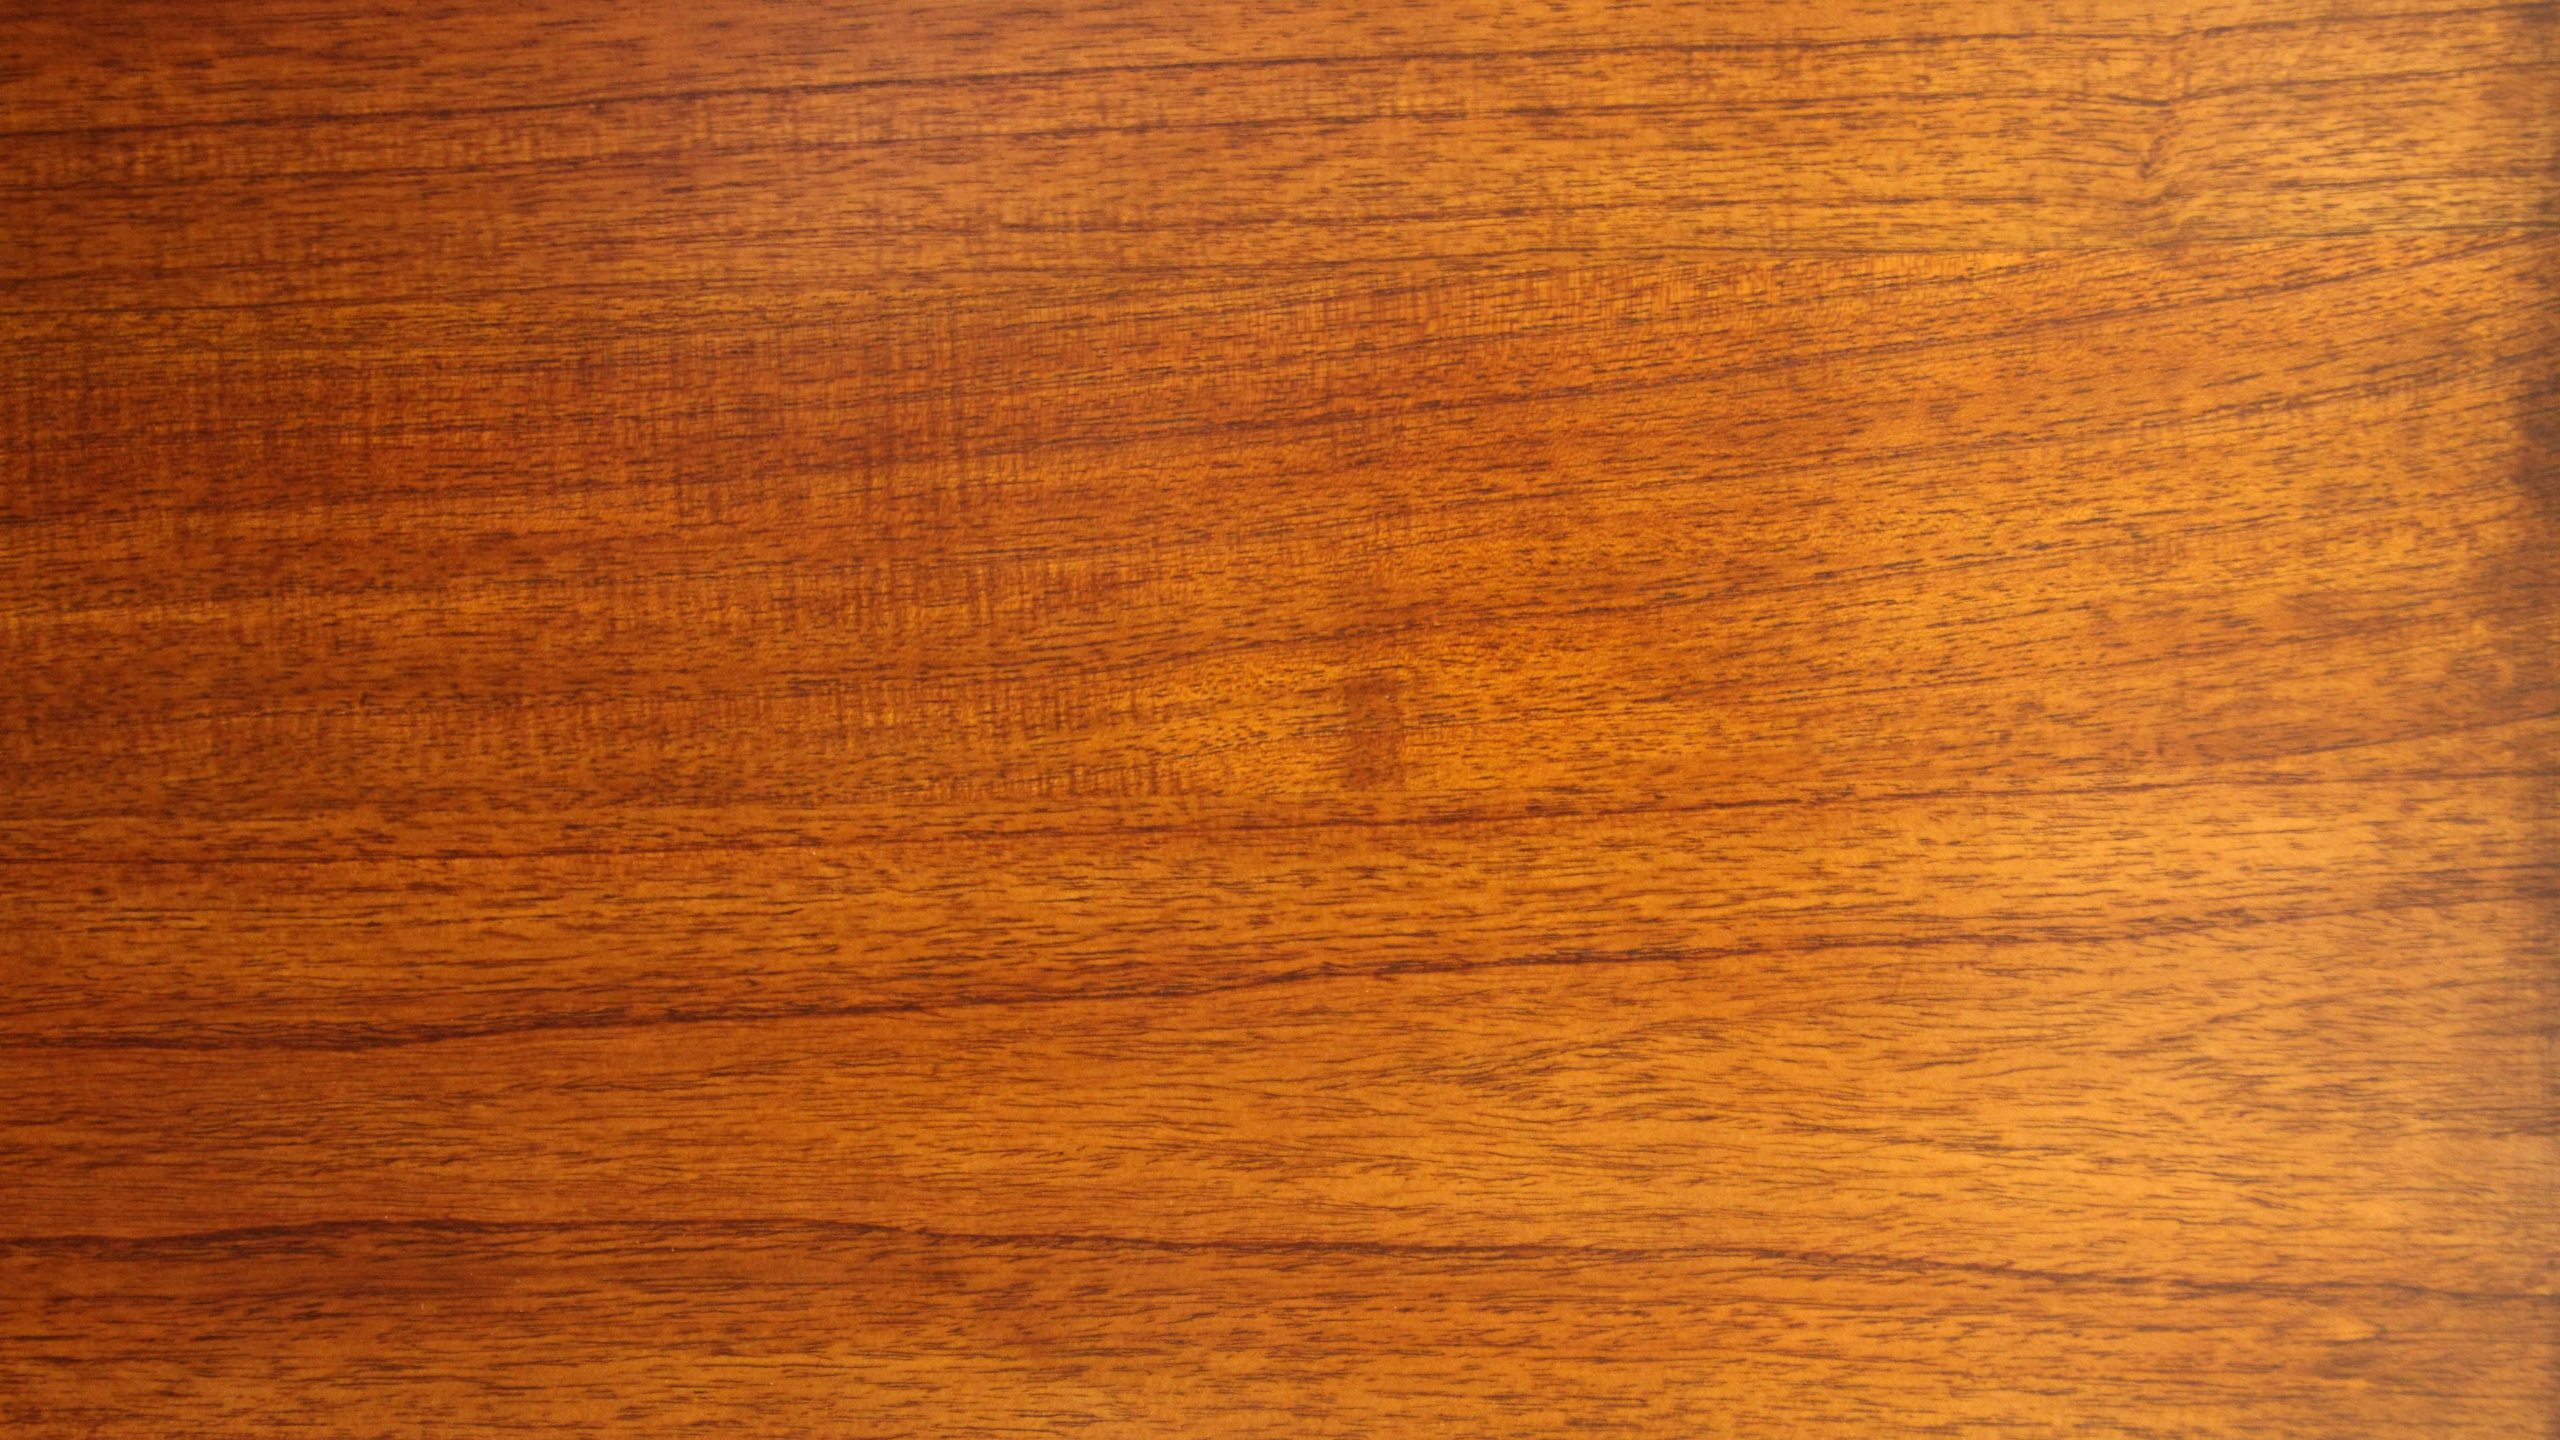 Brown Wooden Table With White Paper. Wallpaper in 2560x1440 Resolution